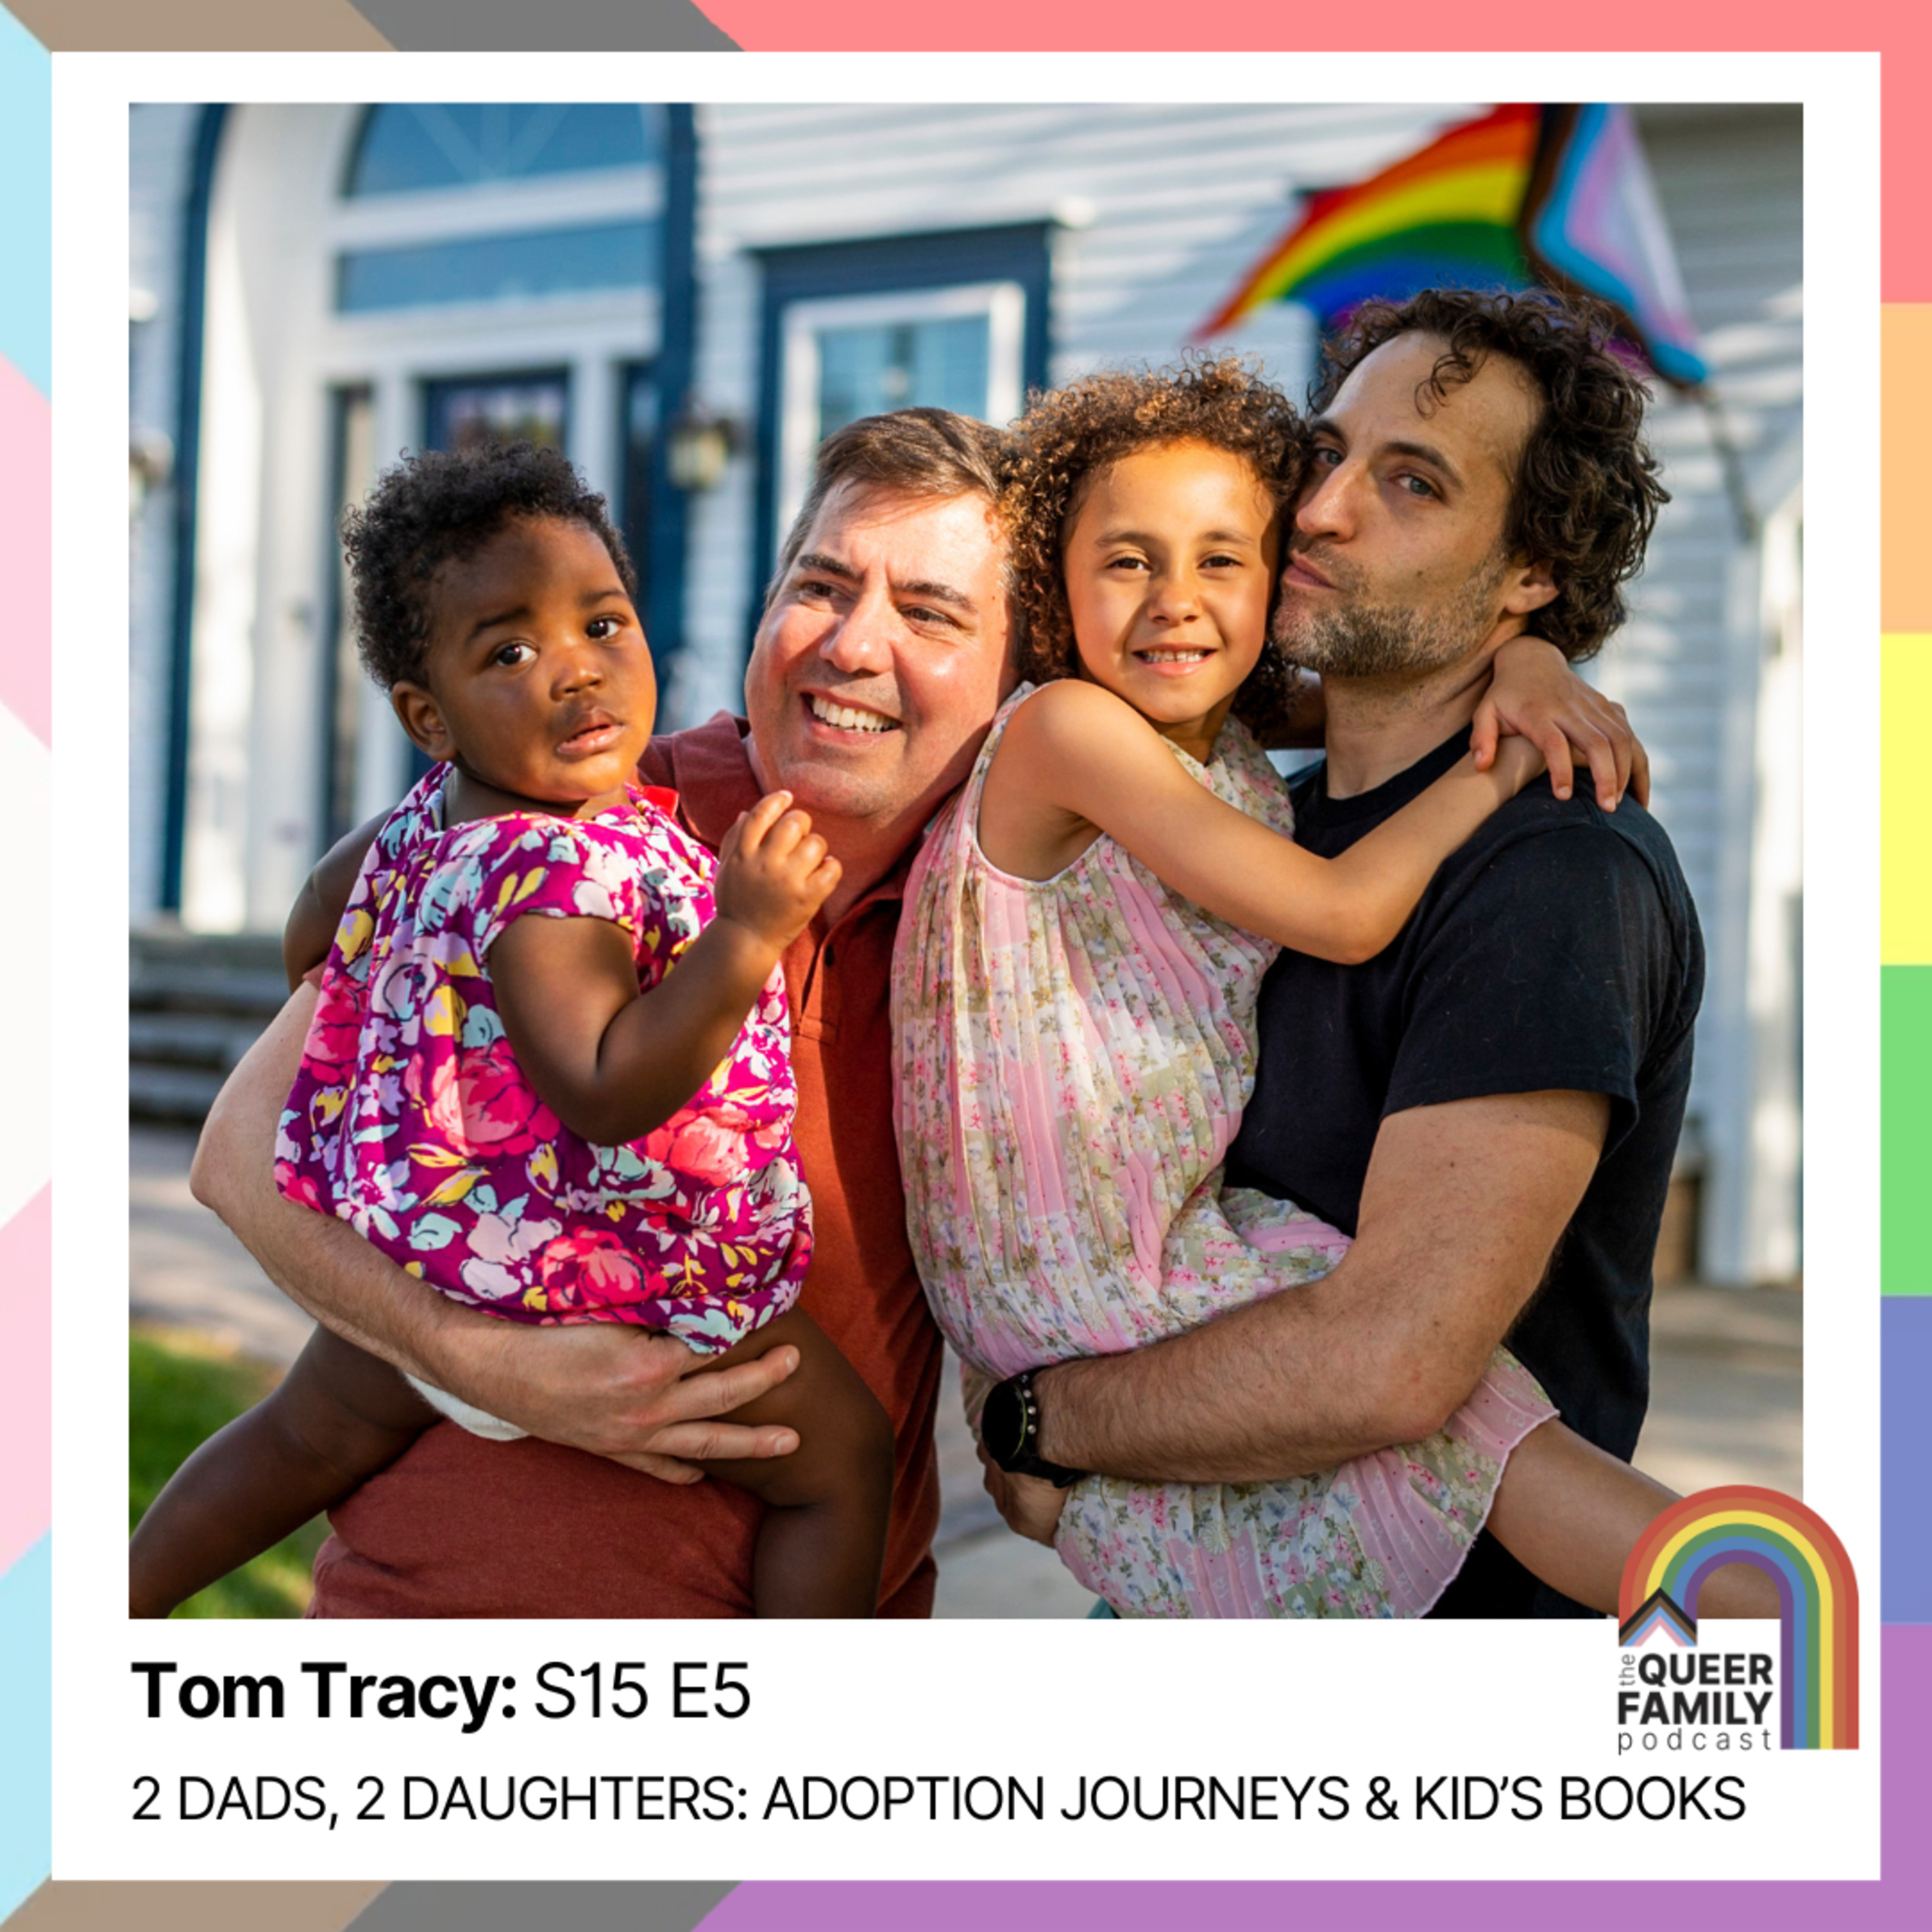 Two Dads, Two Daughters: Adoption Journeys & Kid’s Books